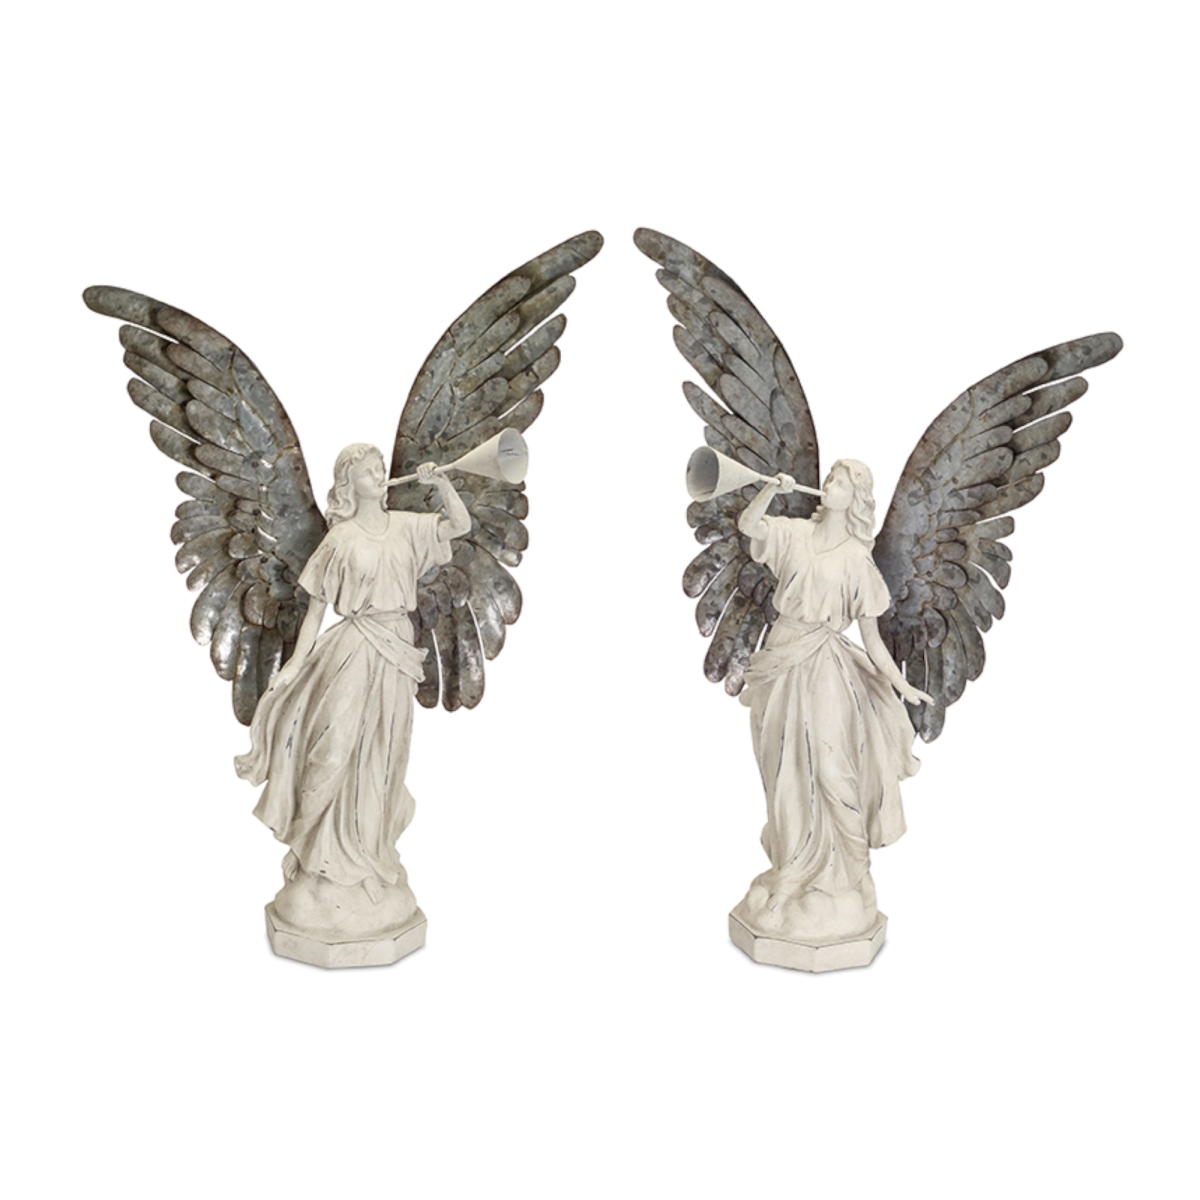 73558ds 21 X 6 In. Resin Angel With Horn, White & Tin - Set Of 2